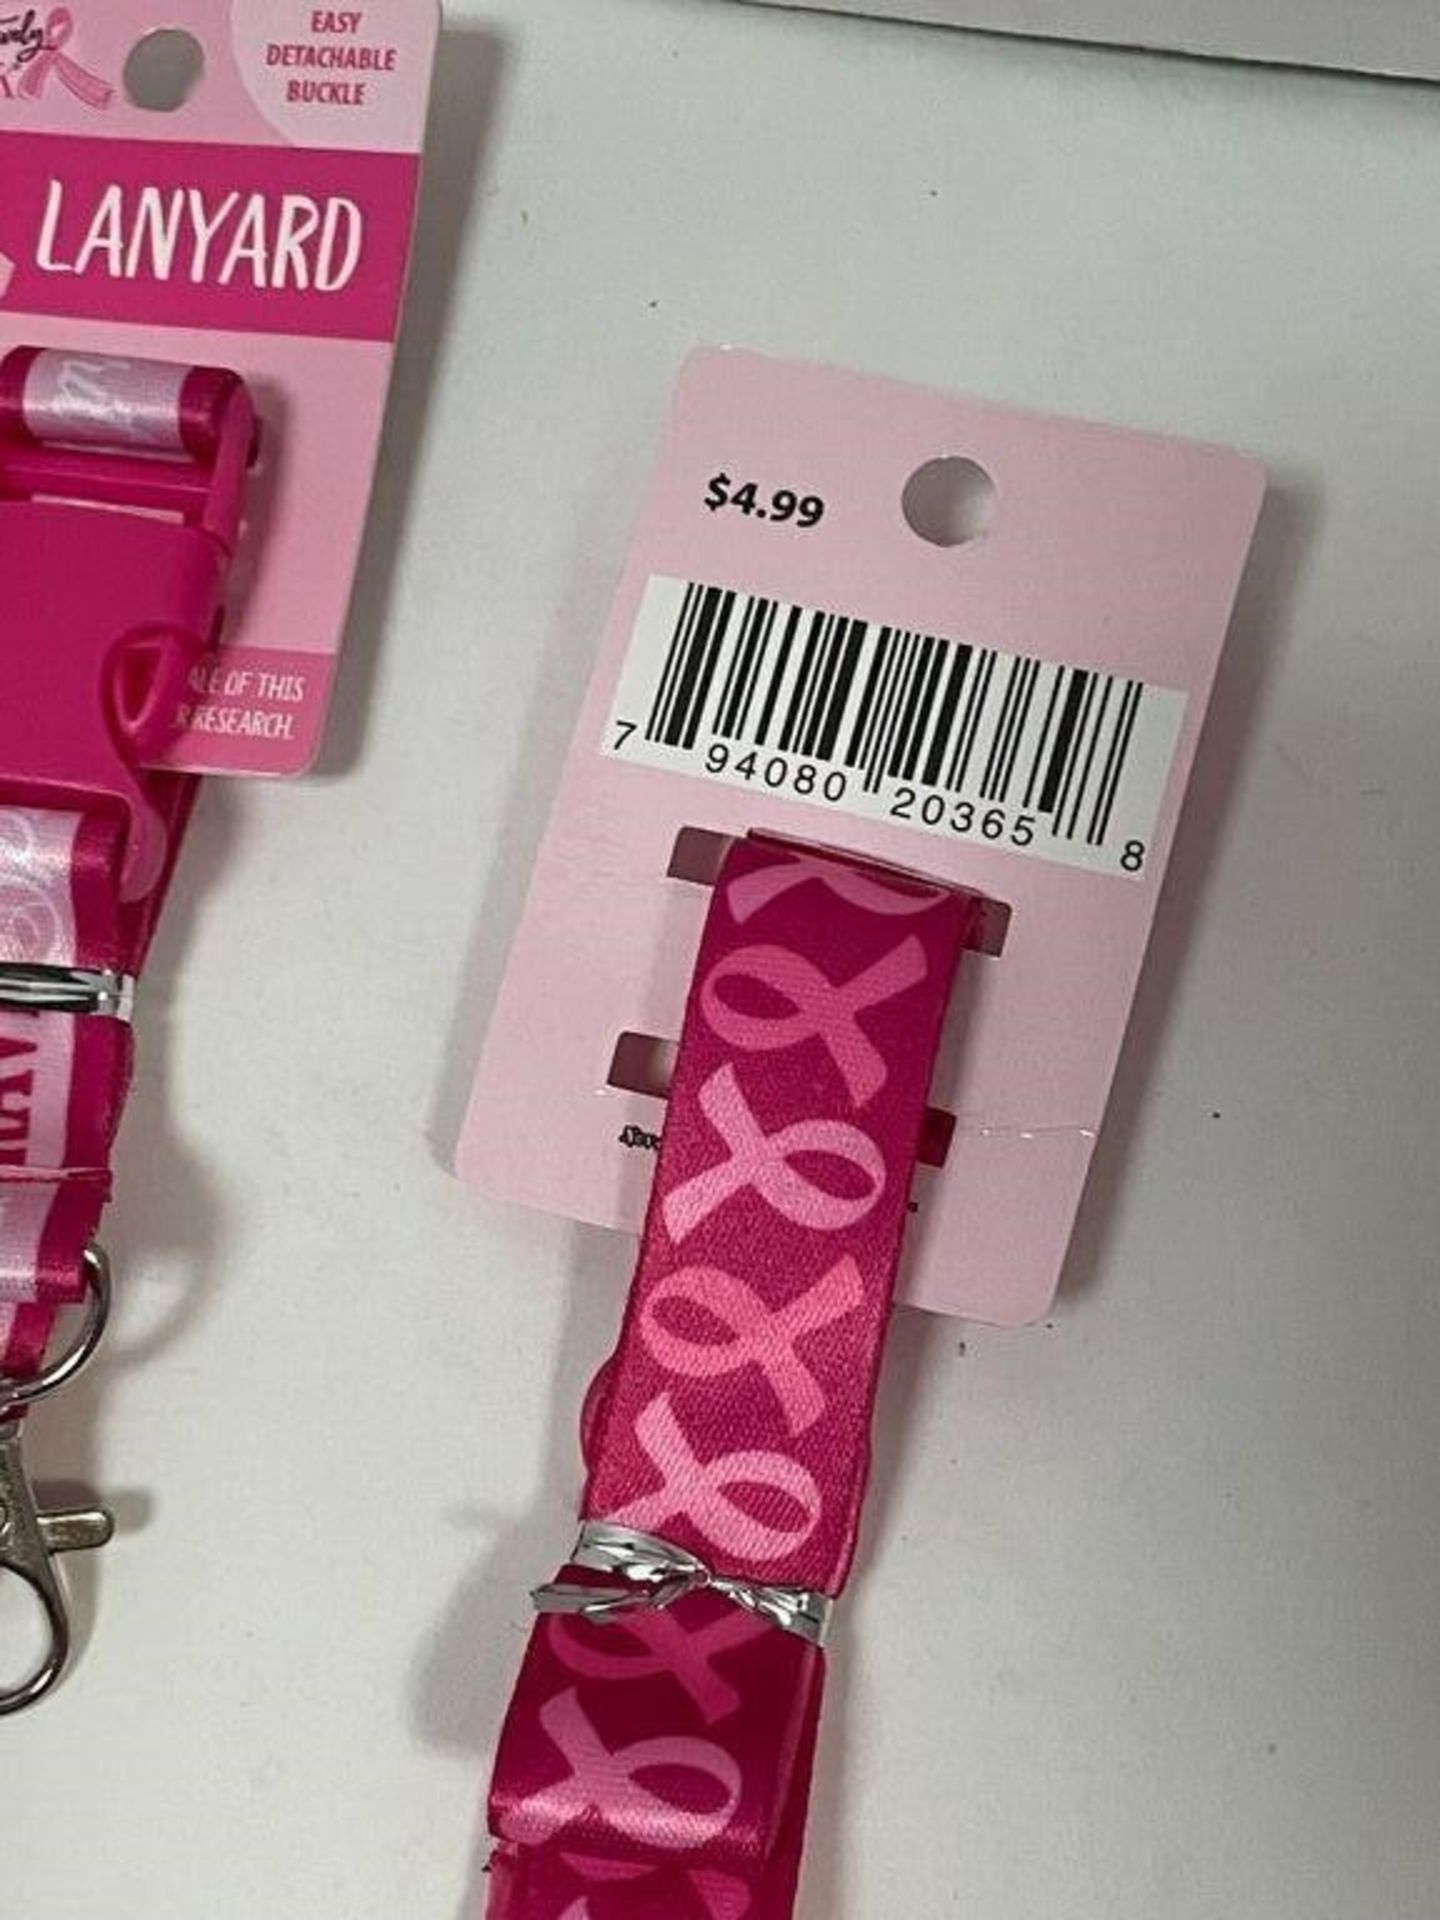 6 X BREAST CANCER PINK LANYARDS WITH KEY CLASP, VARIOUS DESIGNS - Image 4 of 4